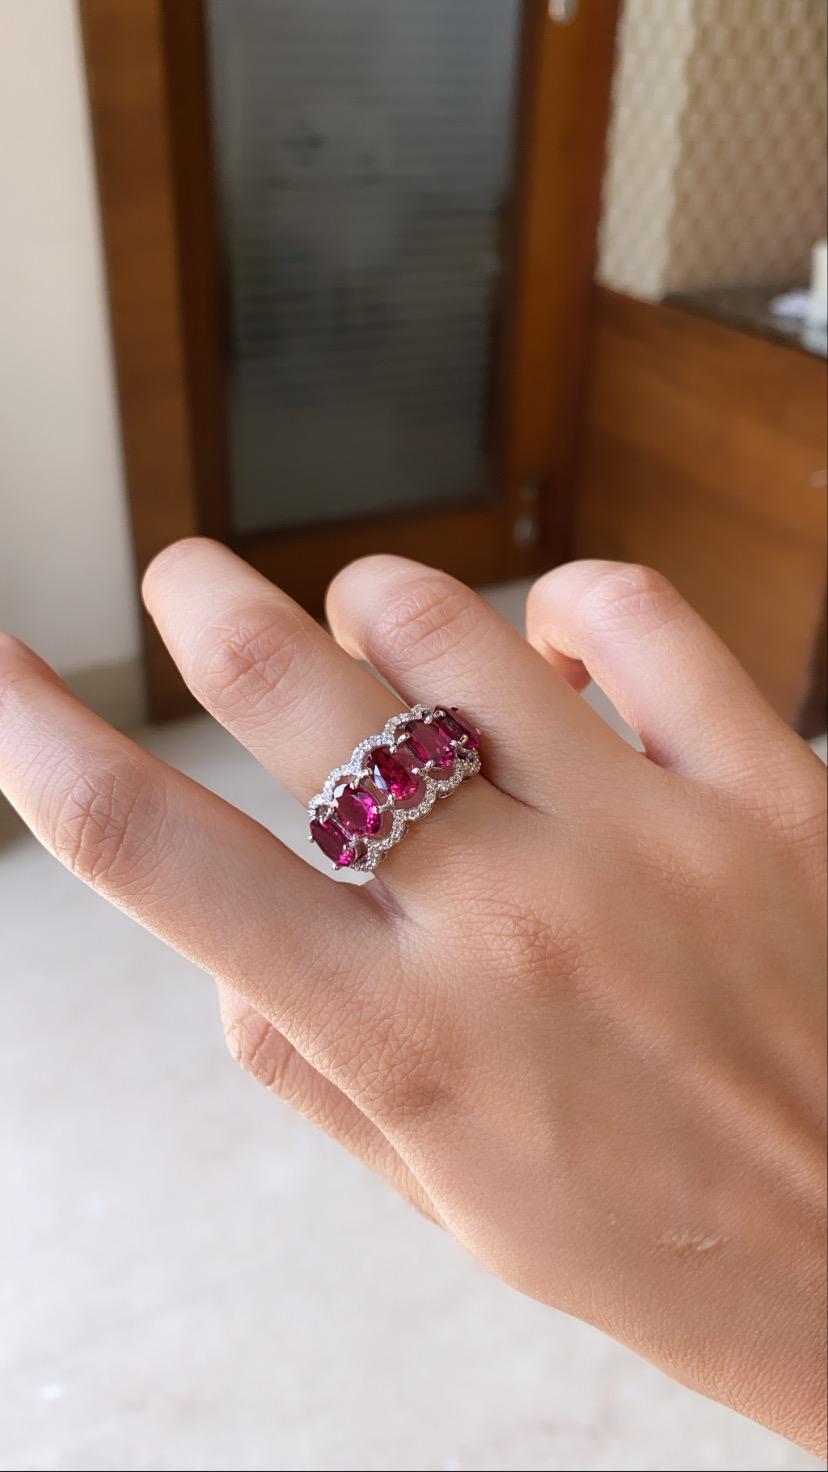 A simple and elegant rubellite band ring set in 18k white gold with natural diamonds. The rubellite weight is 3.85 carats and diamond weight is .45 carats. The net gold weight is 4.736 grams and ring dimensions in cm 1.5 x 2.5 x 2.2 (LXWXH). US size